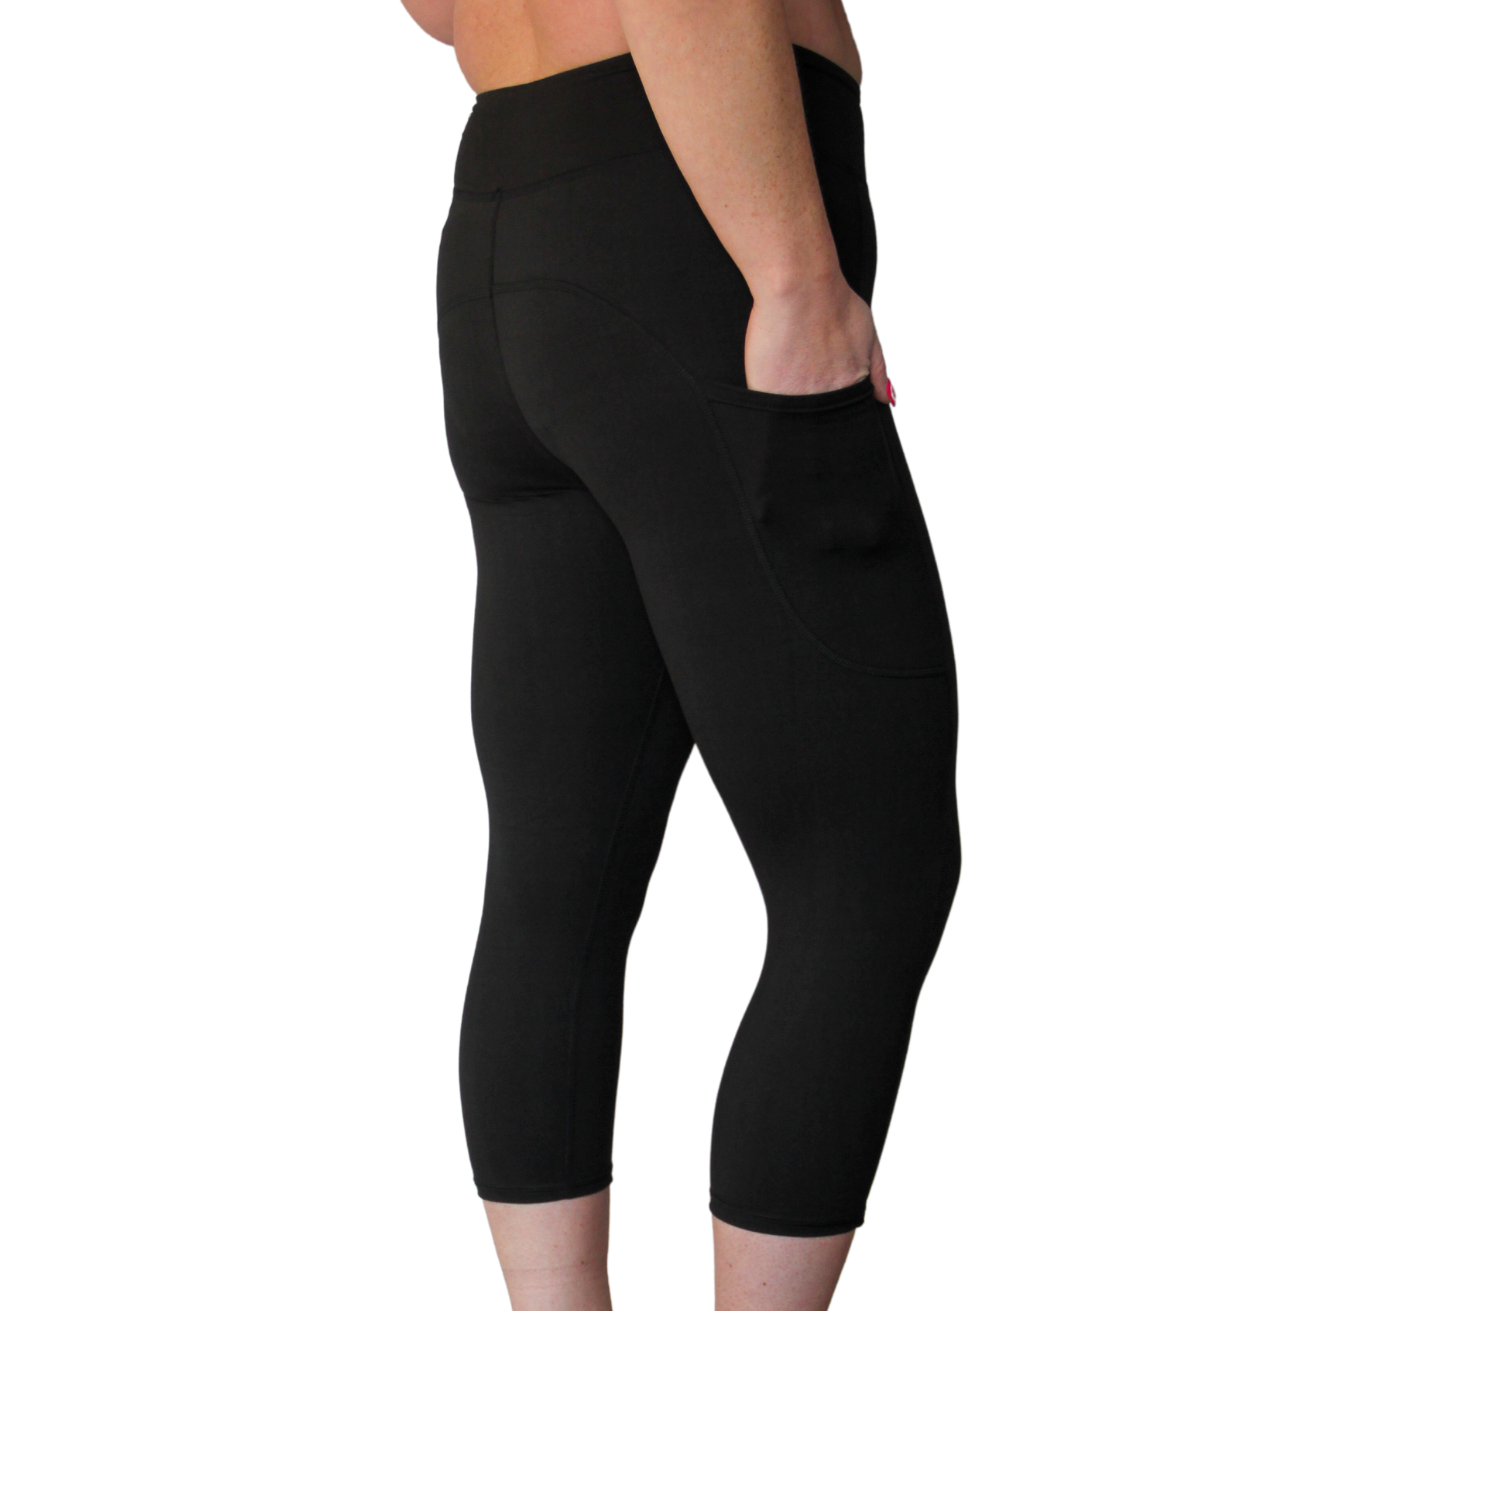 Black Leggings for Women-high Waist Tights-soft Athletic Tummy Control Pants  for Running Cycling Yoga Workout-one Size Fits All UK6-18 -  Canada